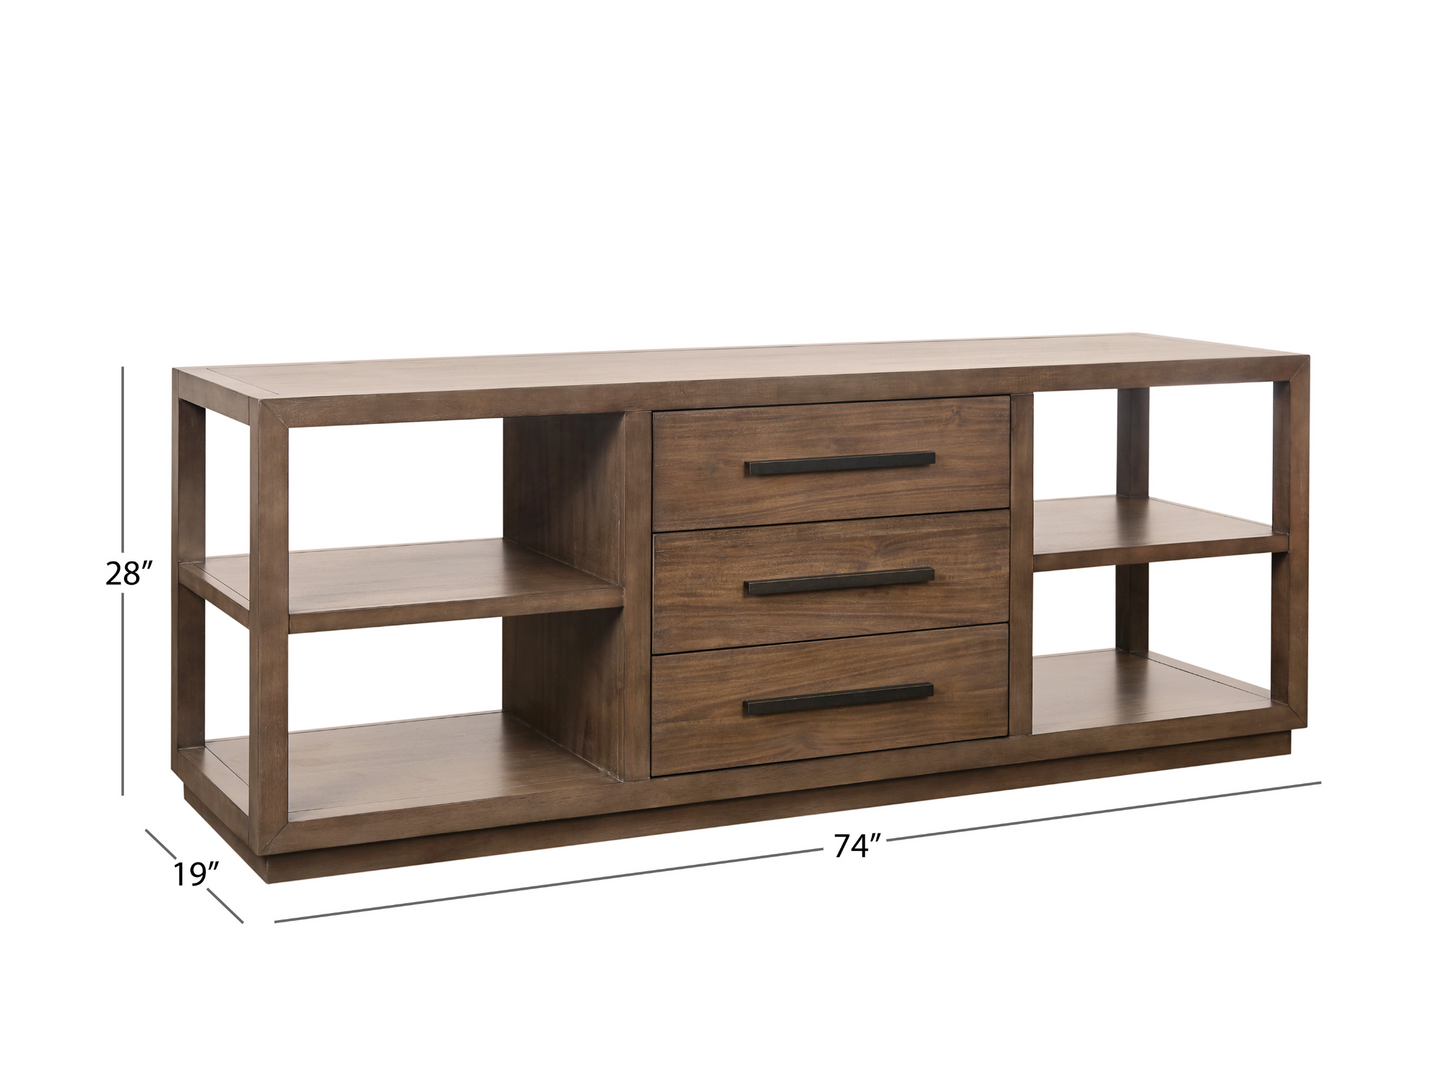 Lowell 74" Media Console